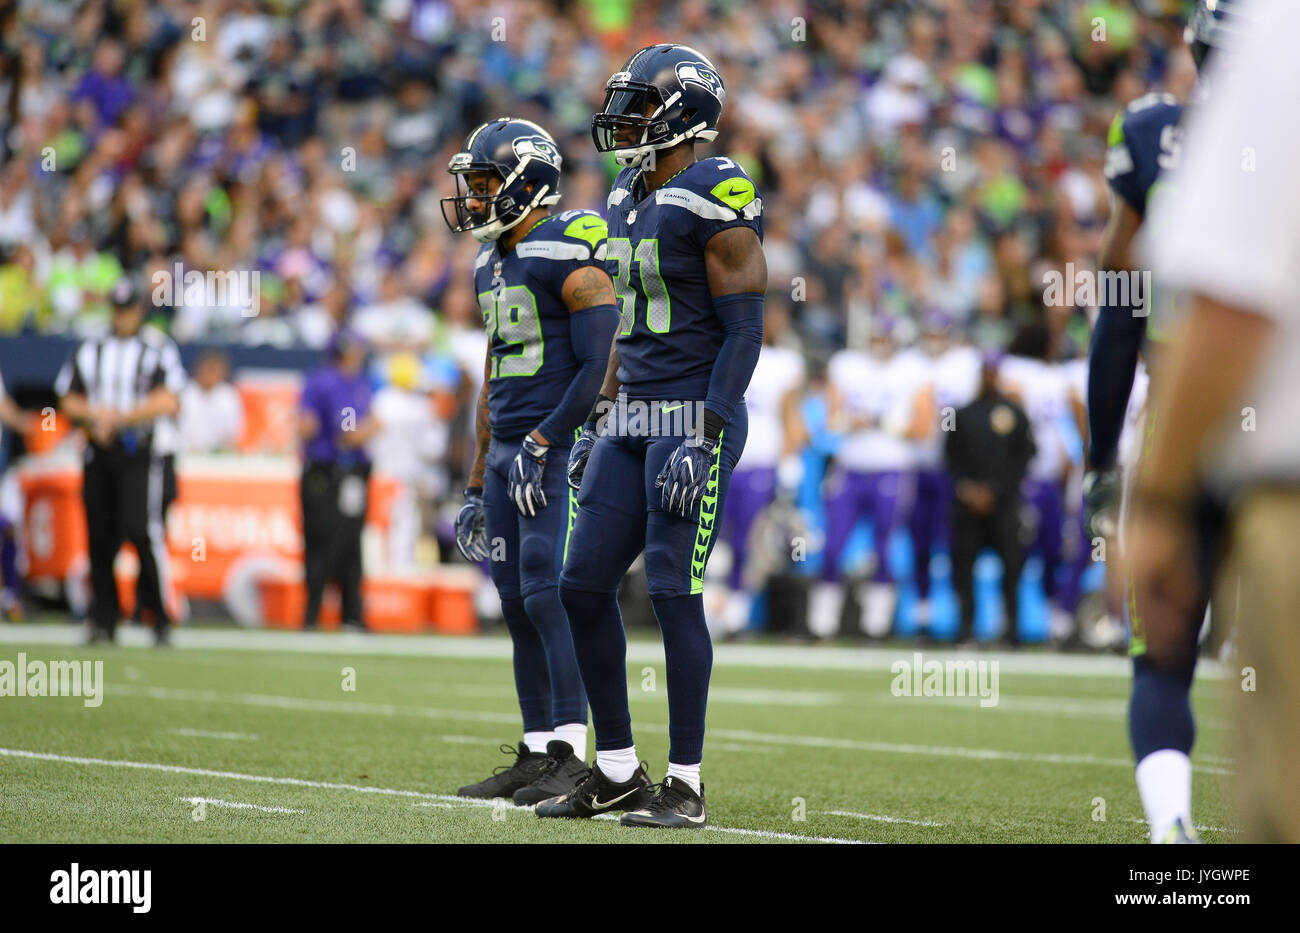 August 18, 2017: Kam Chancellor (31) and Earl Thomas (29) during a NFL pre-season game between the Seattle Seahawks and the Minnesota Vikings. The game was played at Century Link Field in Seattle, WA. © Jeff Halstead / CSM Stock Photo